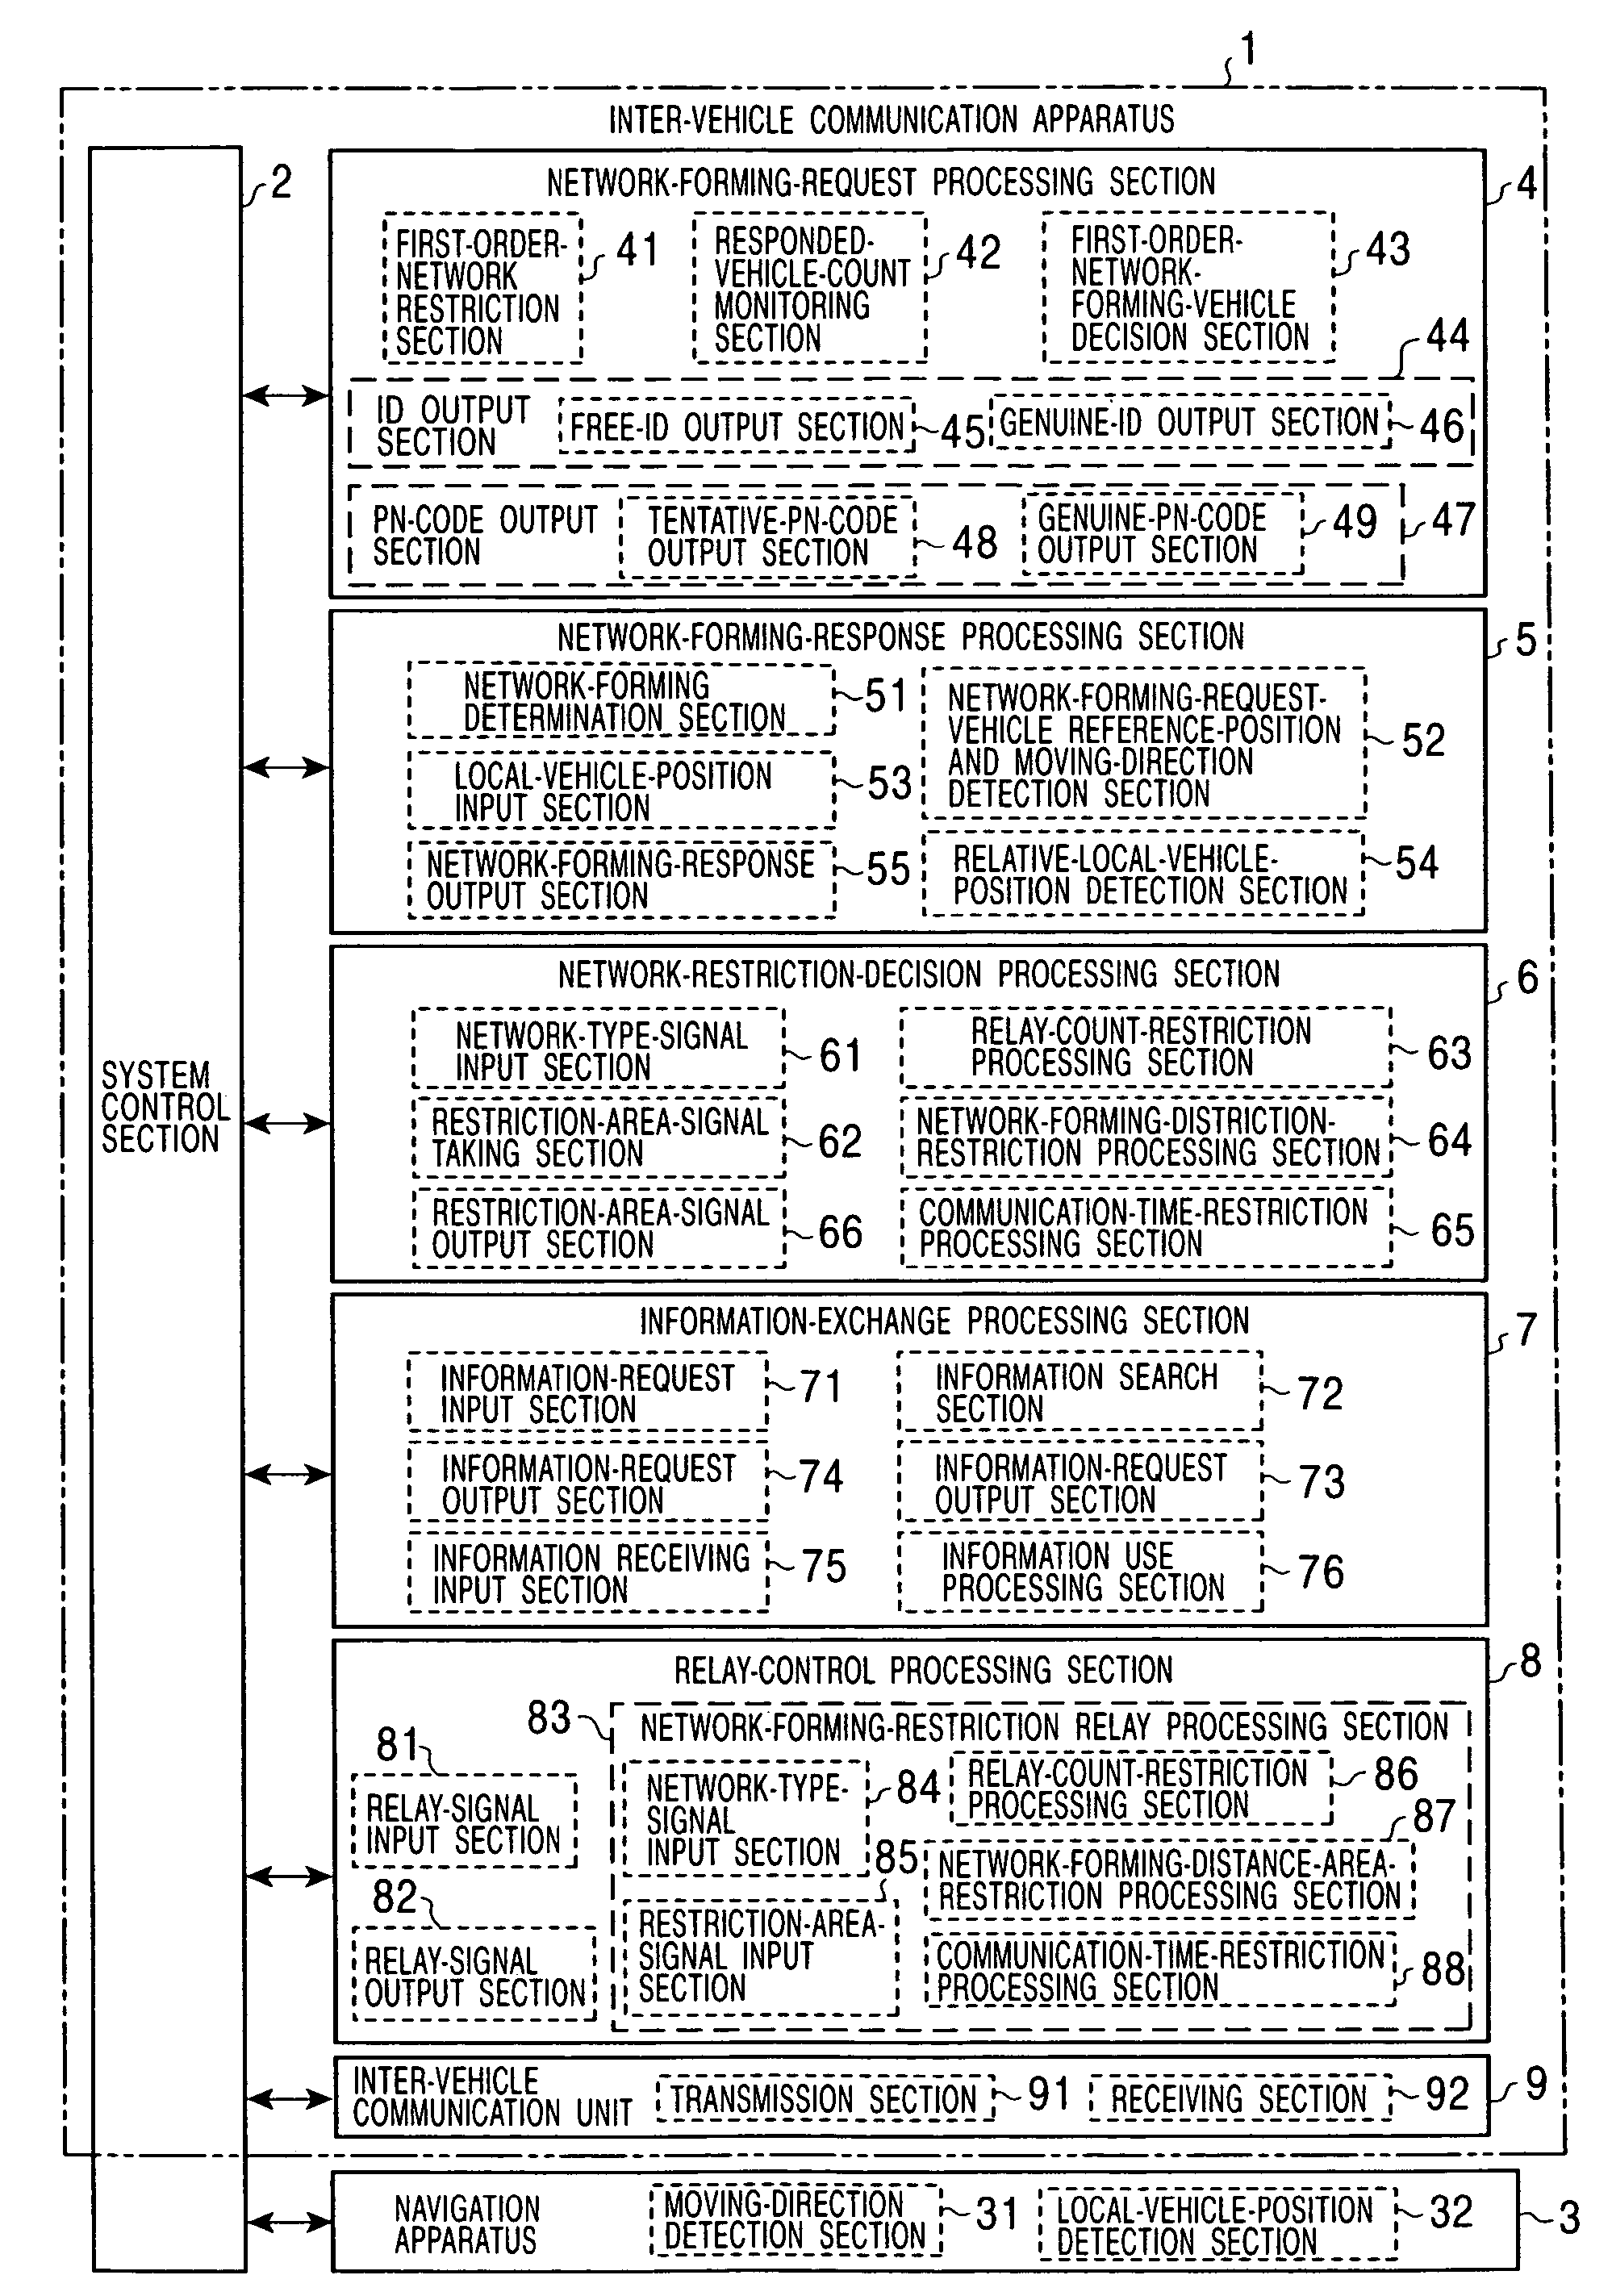 Inter-vehicle communication apparatus and method with restrictions on size of network